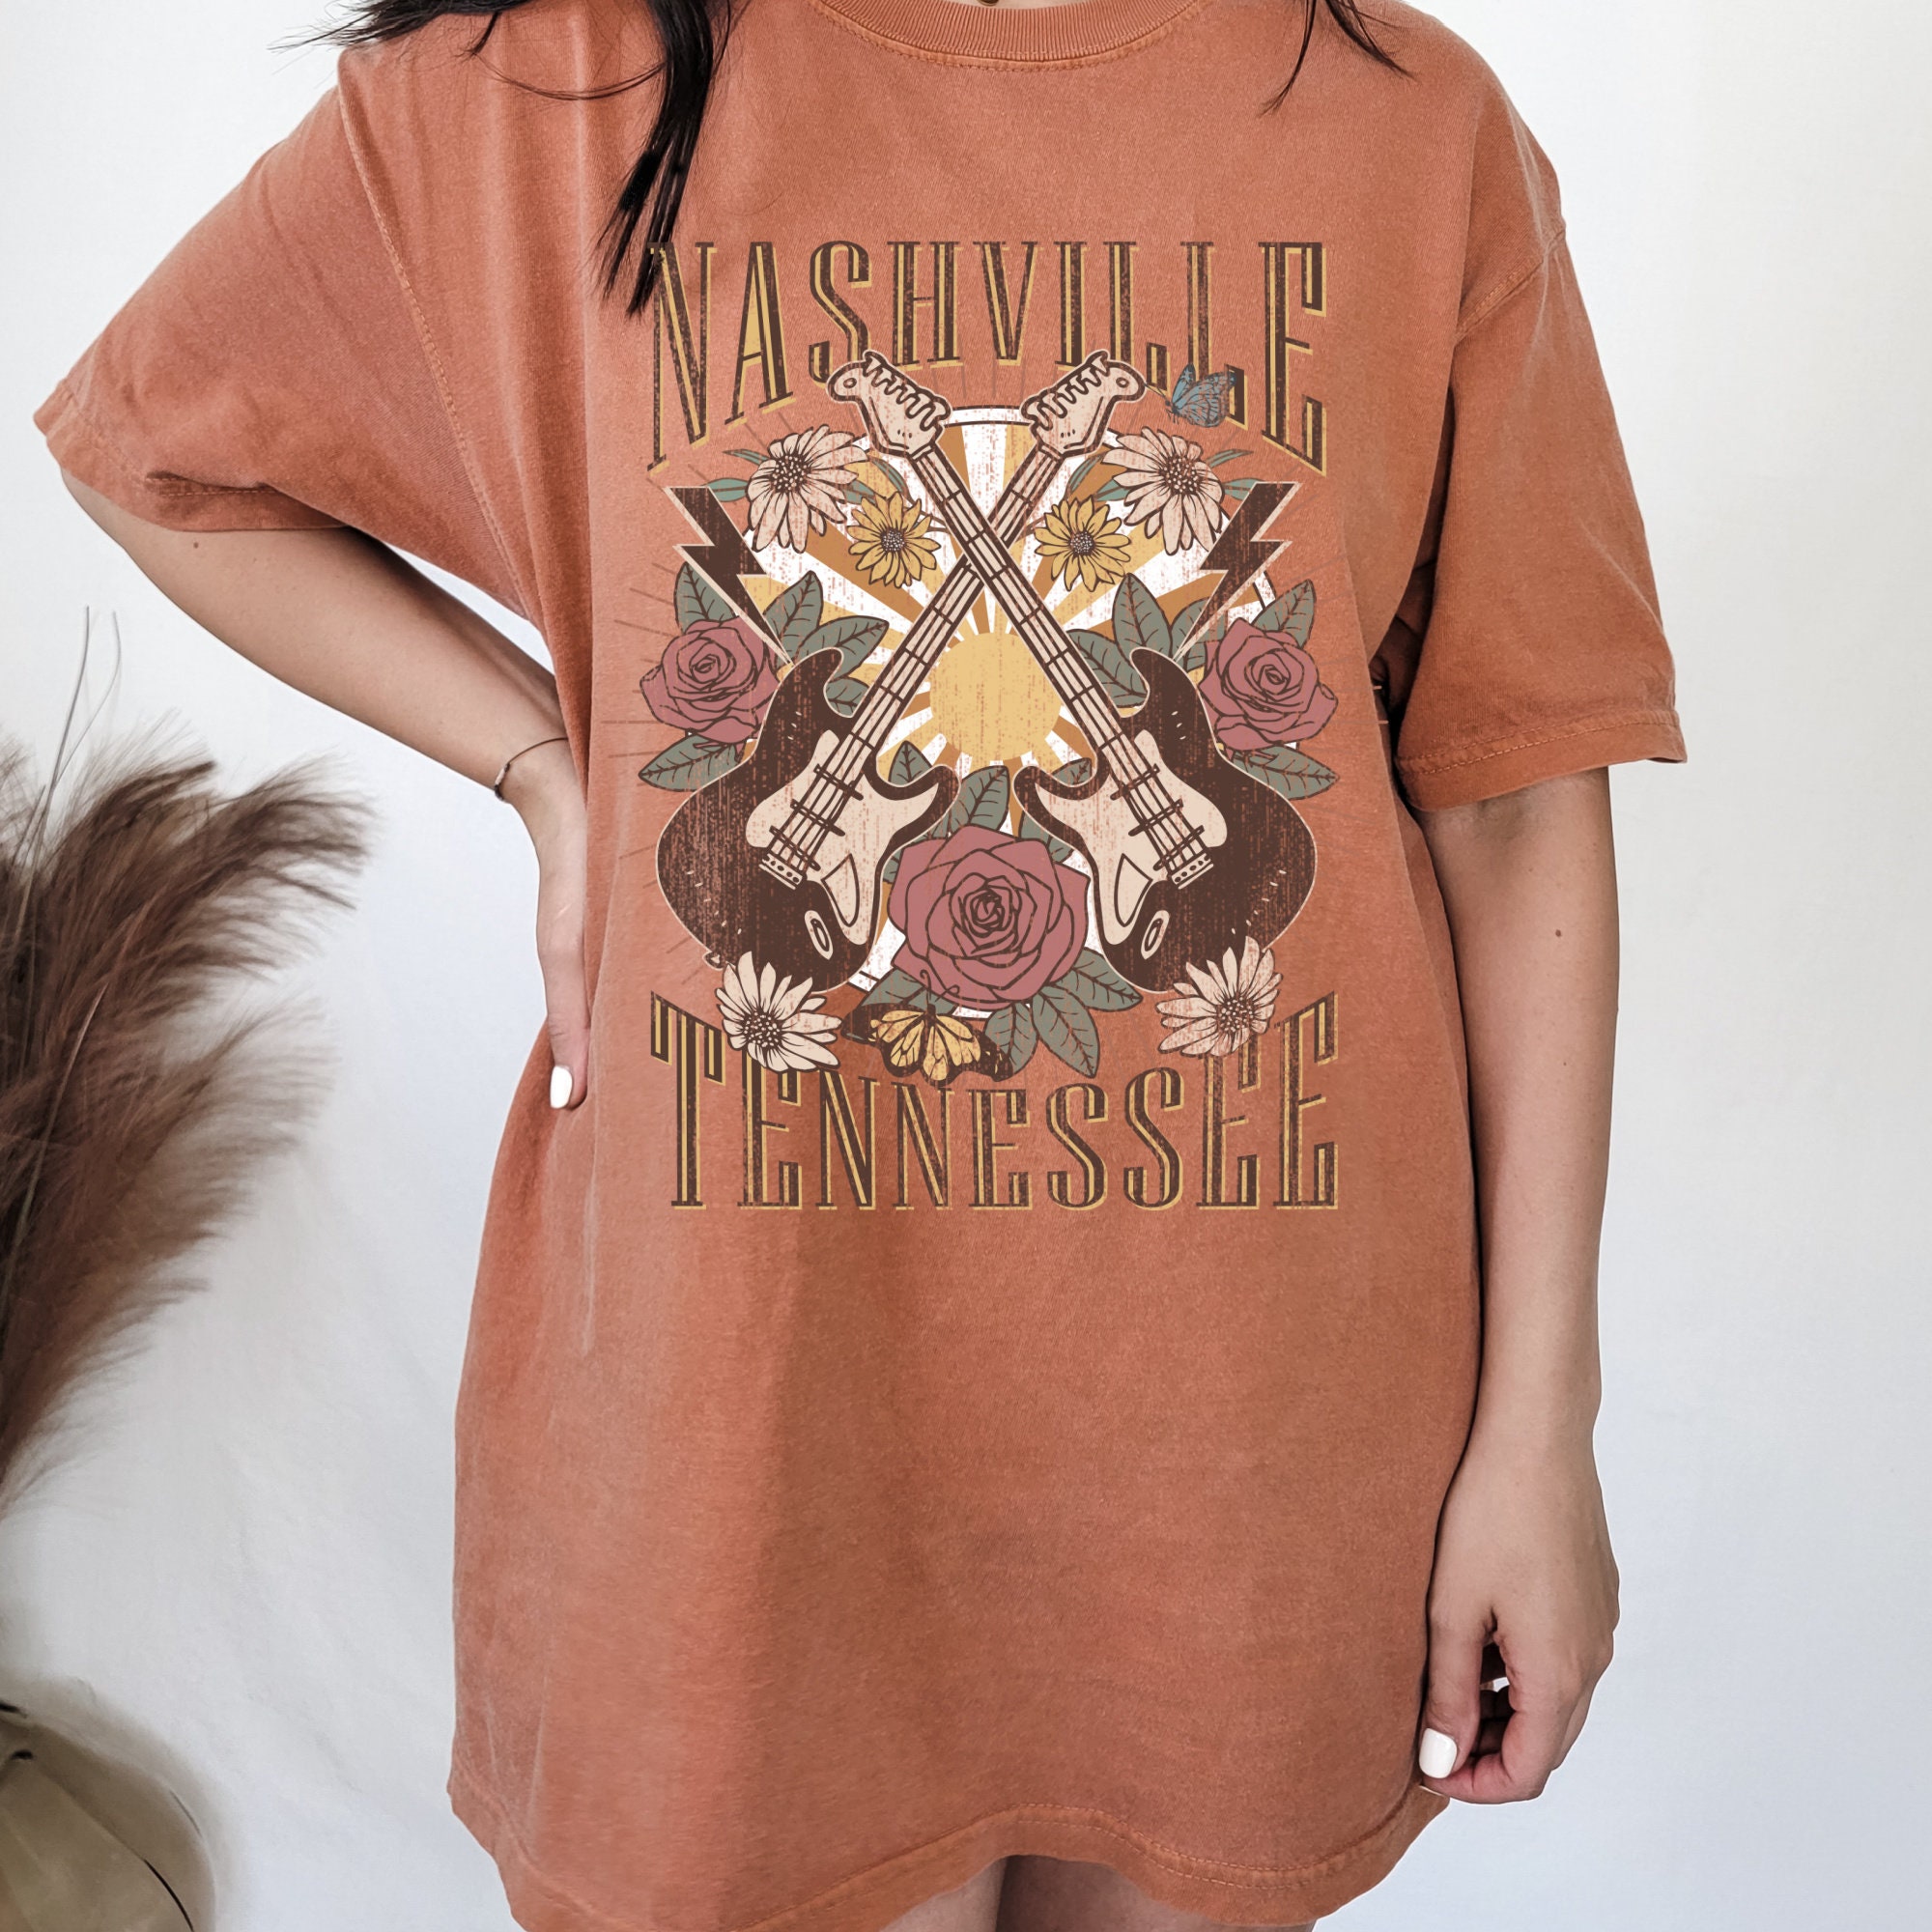 Discover Nashville Tennessee T-Shirt, Color Comfort Rock and Roll T-Shirt